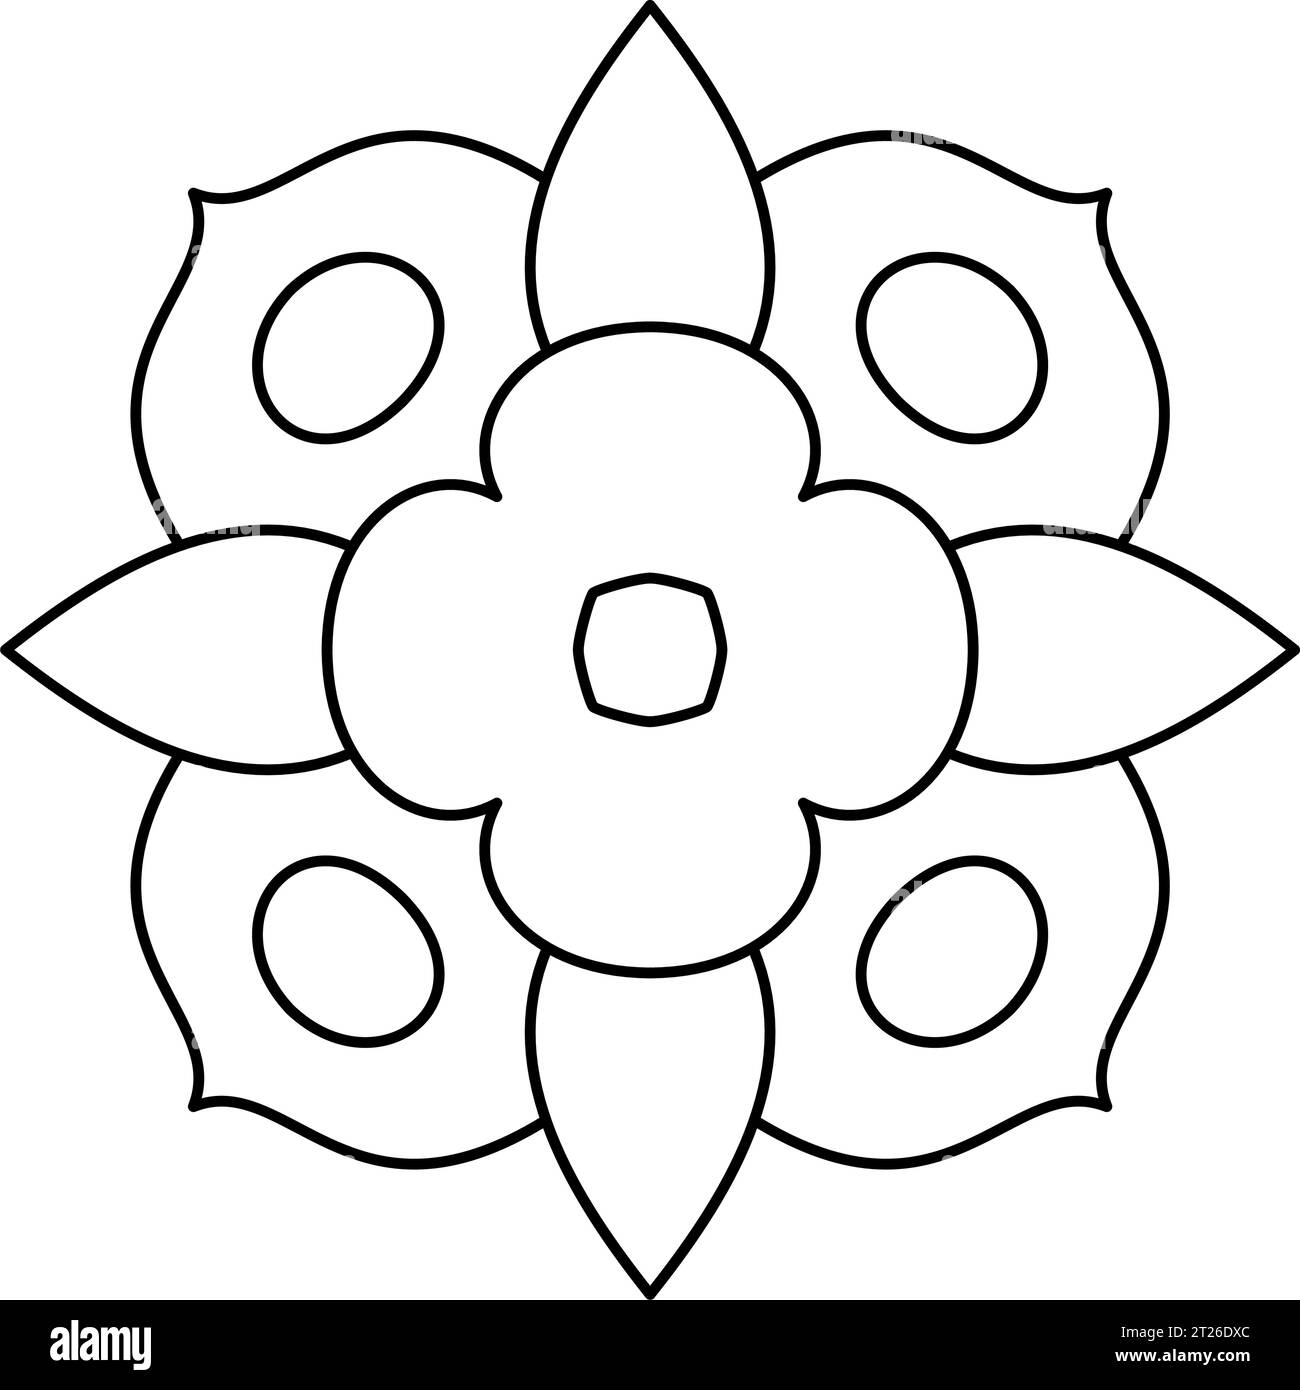 Radial symmetry black and white stock photos images